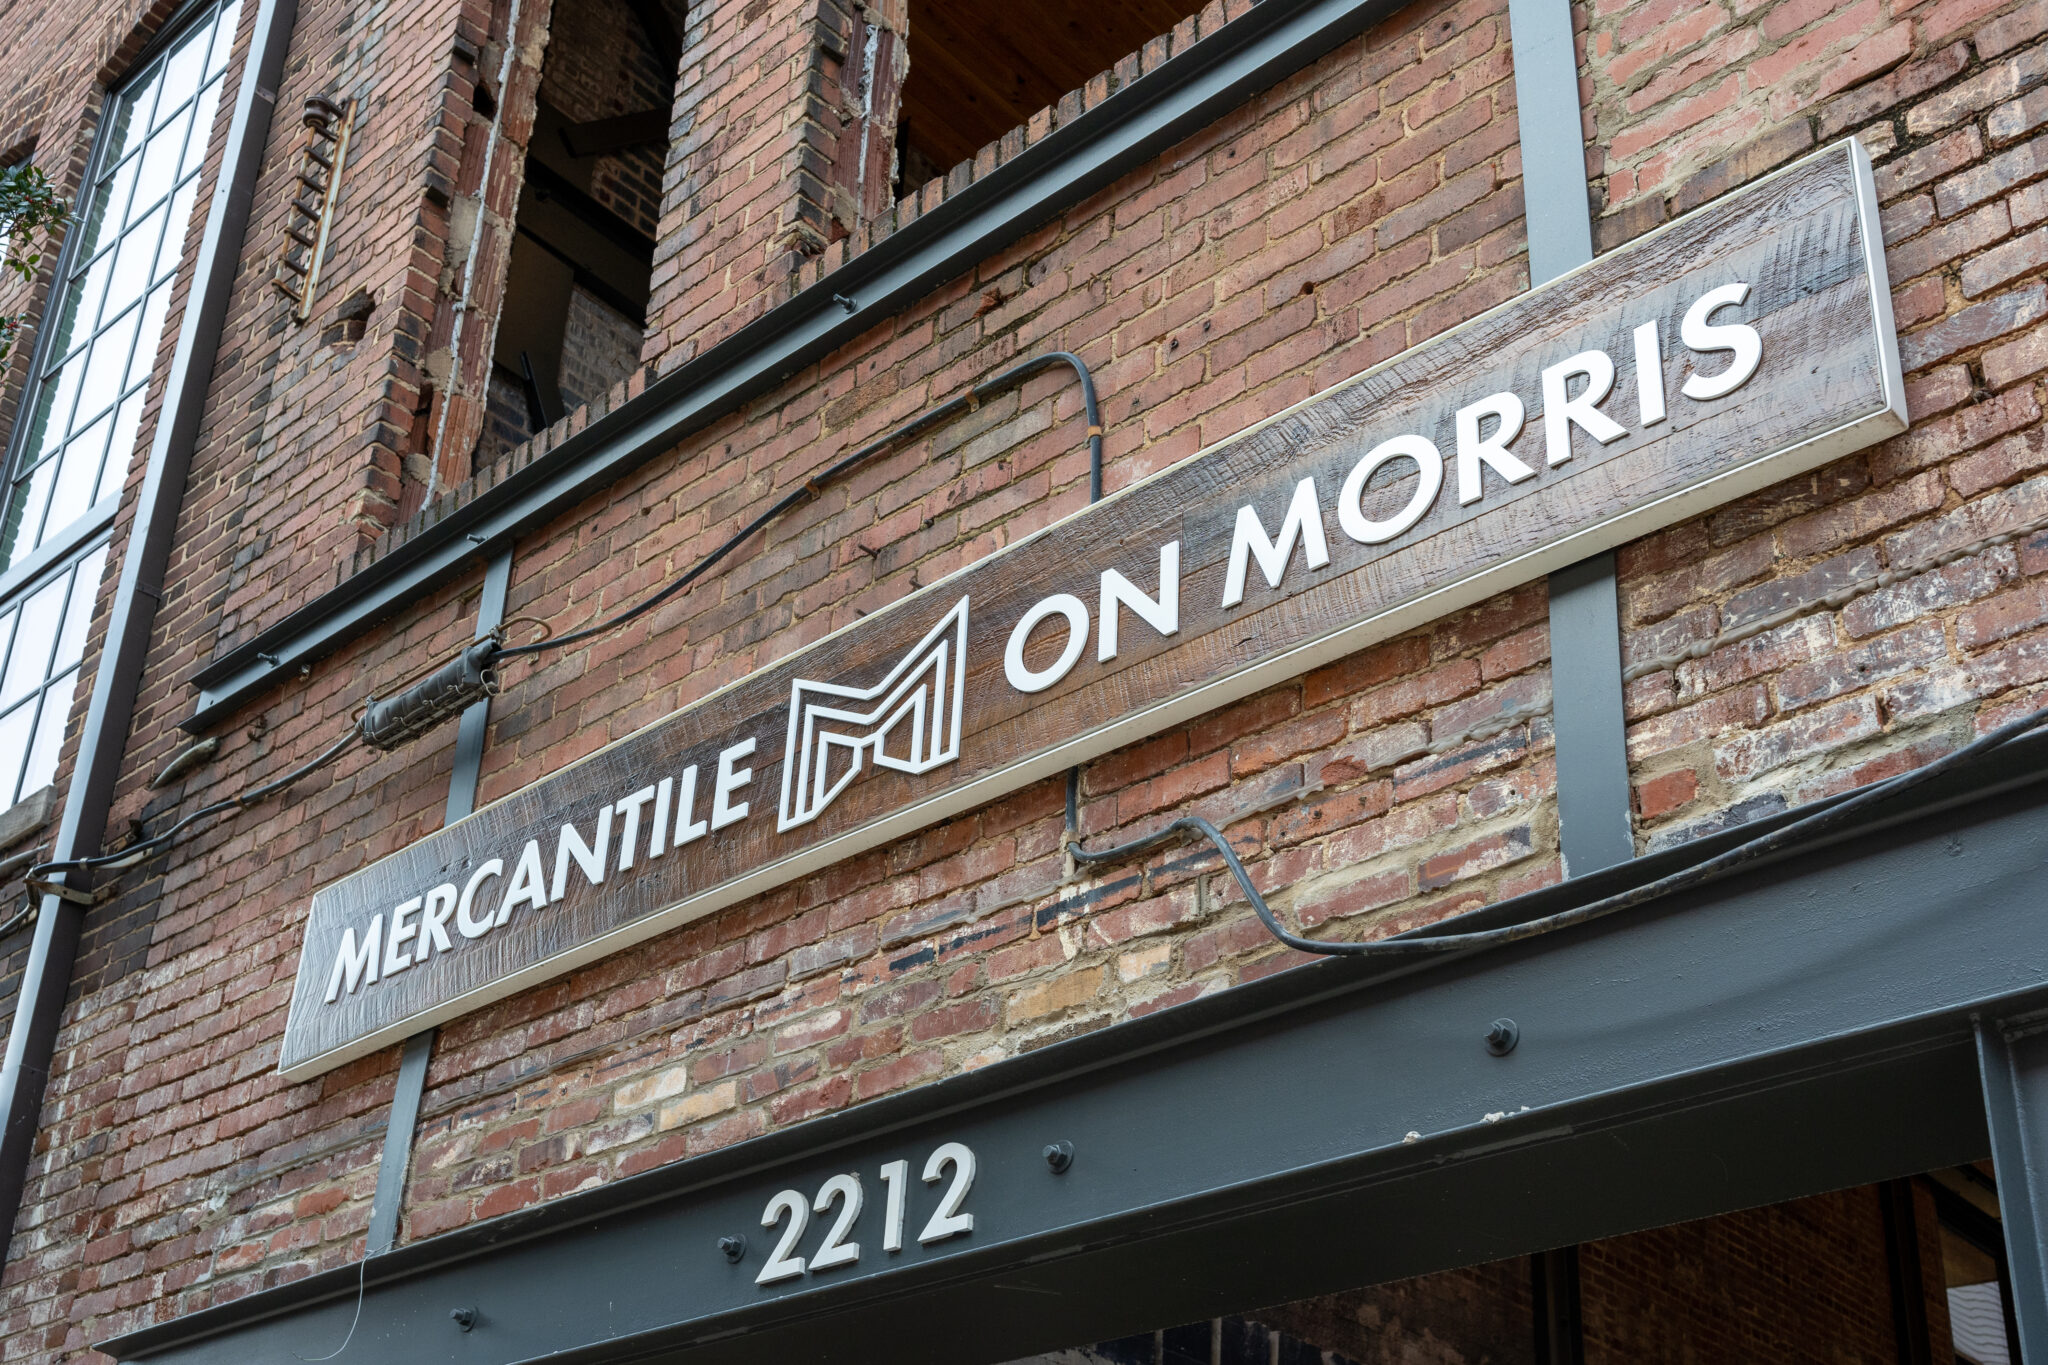 Personal by Studio E Fitness at Mercantile on Morris